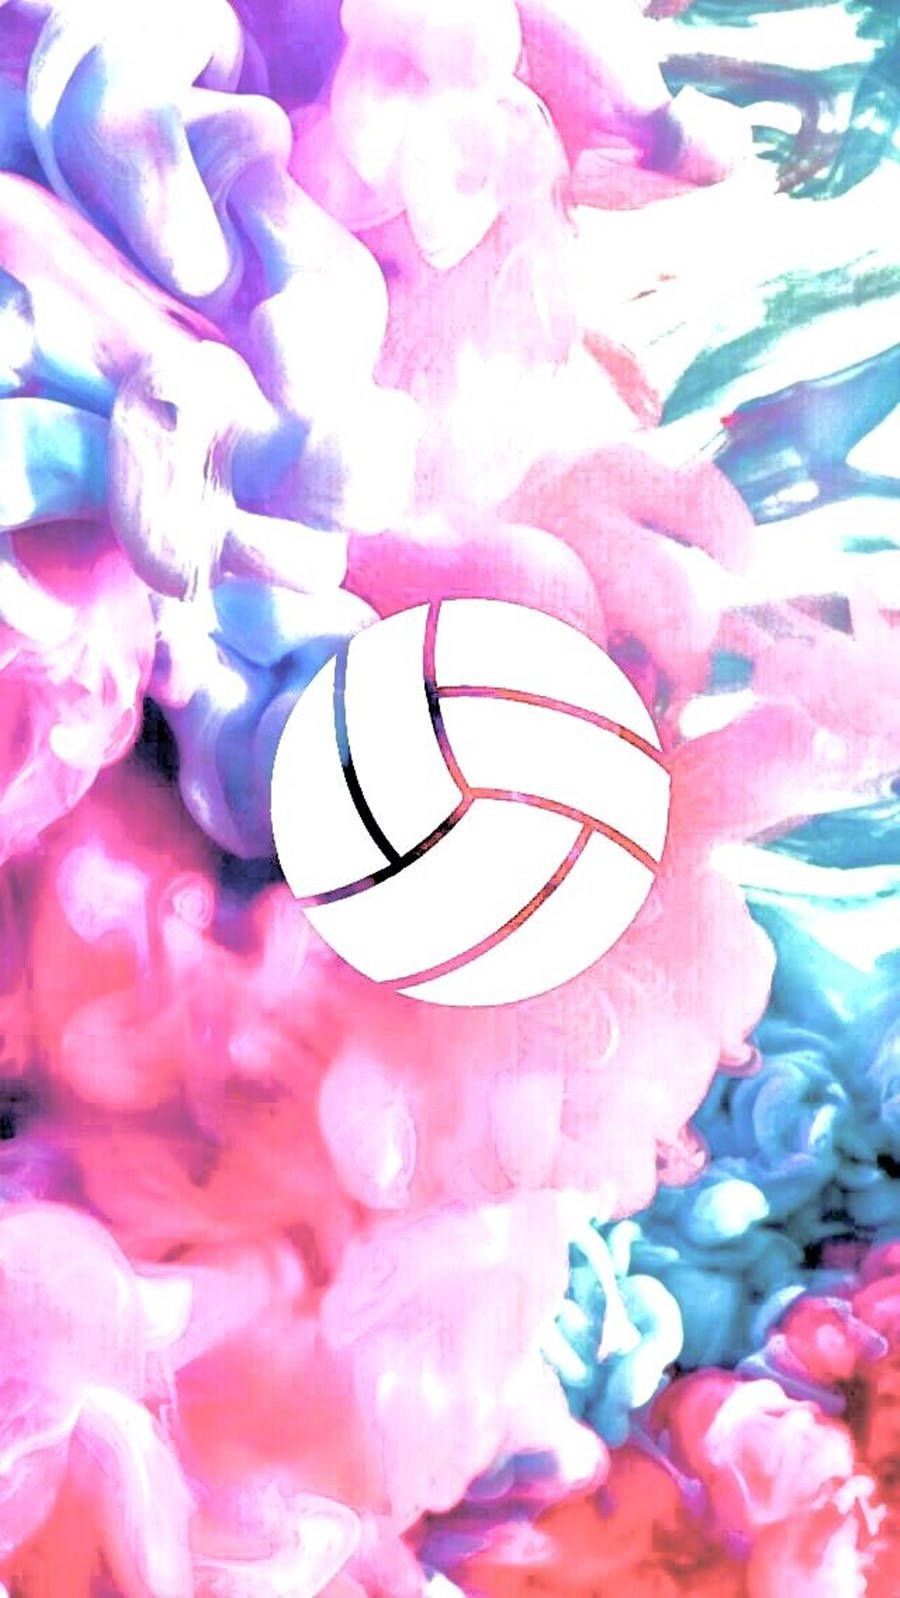 Volleyball wallpaper for phone or desktop background. - Volleyball